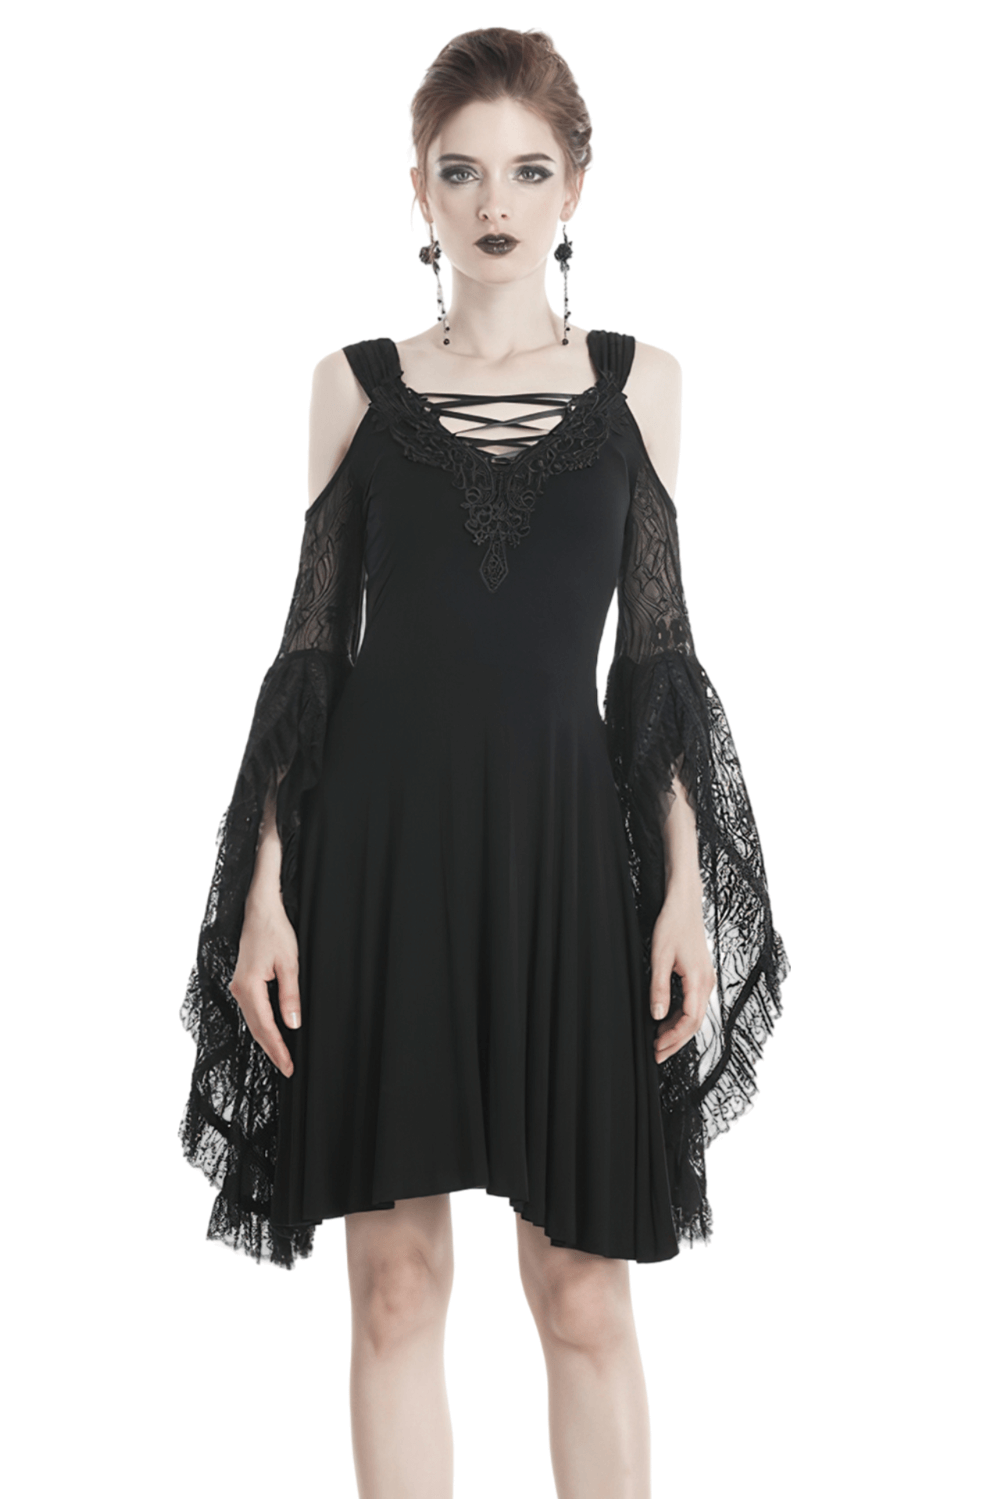 Gothic Female Dress with Lace-up and Dramatic Lace Sleeves